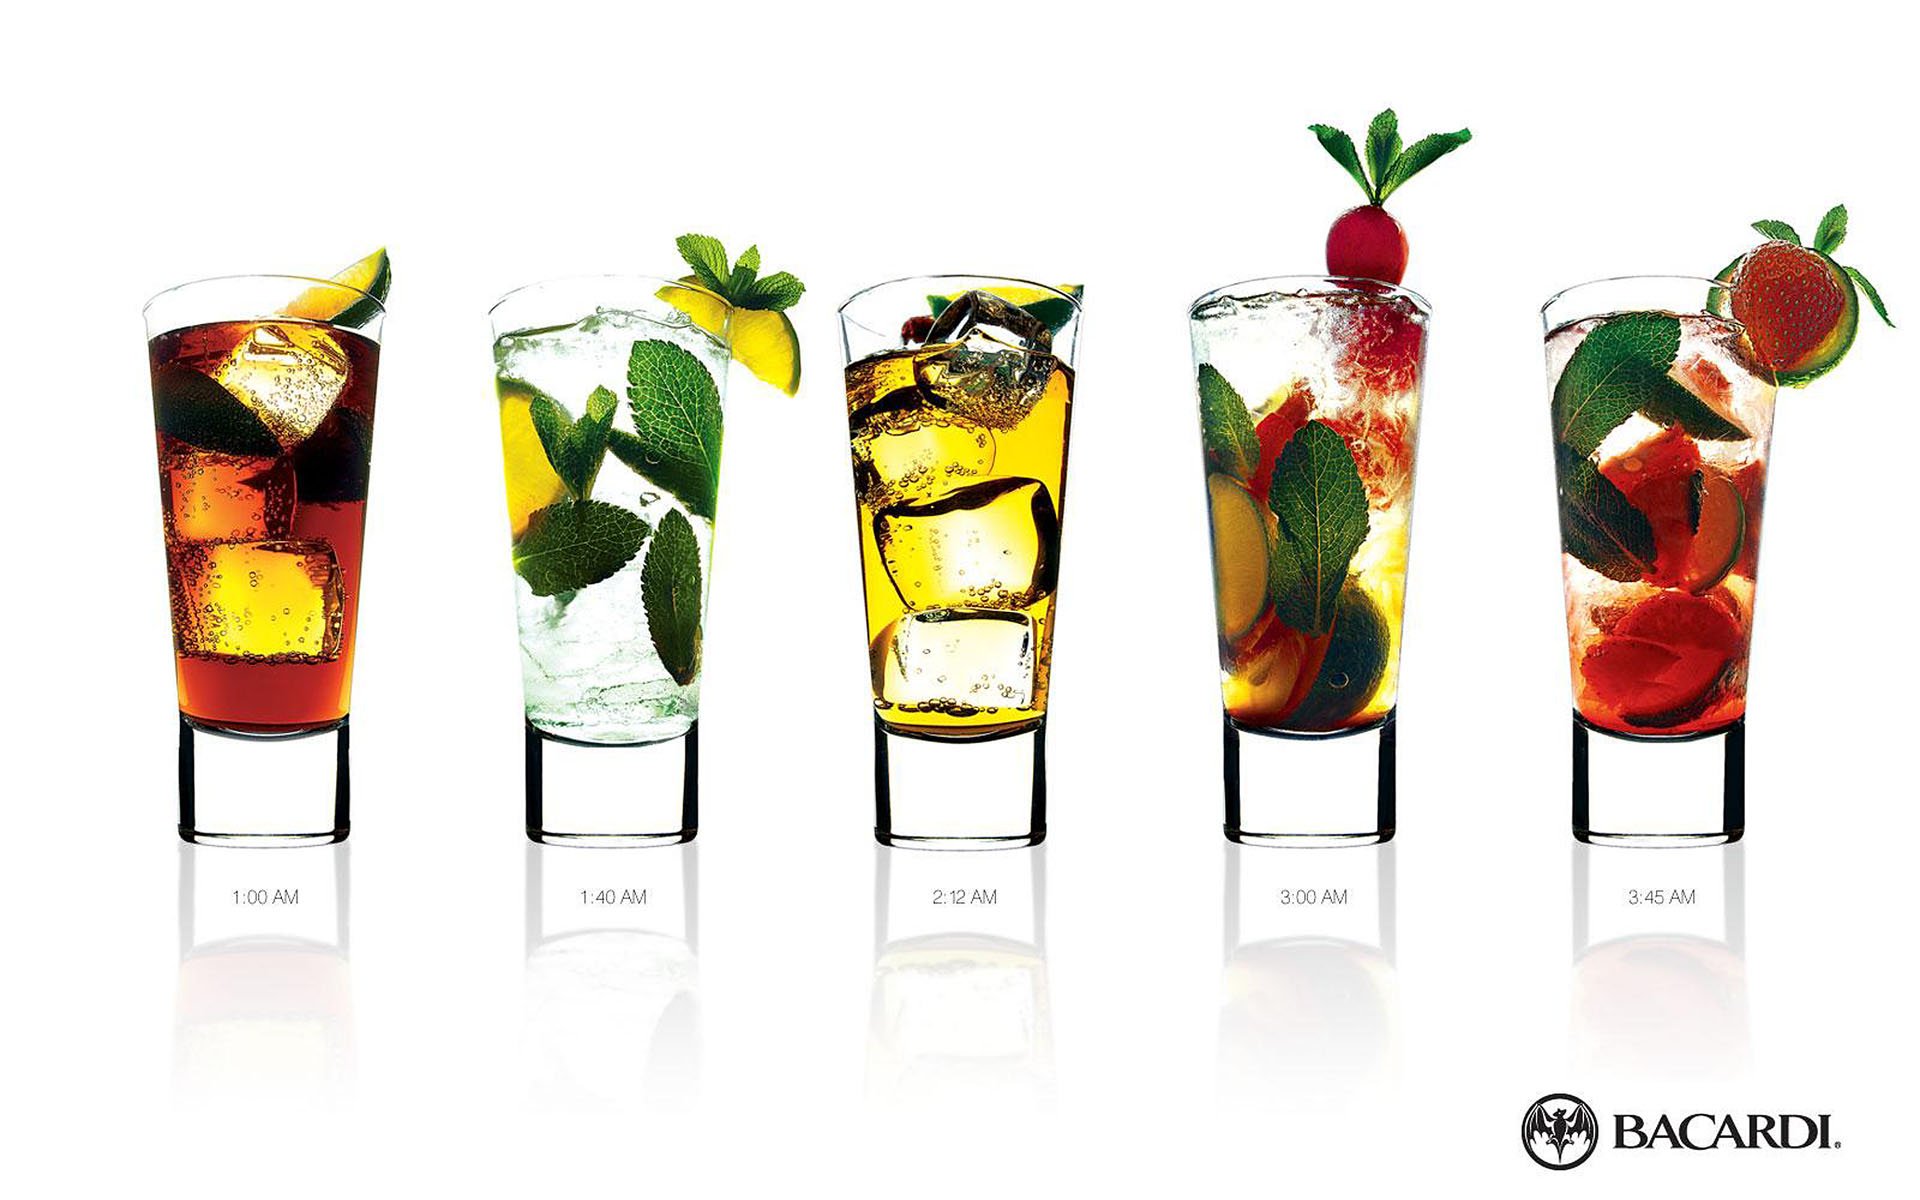 Products Bacardi HD Wallpaper | Background Image